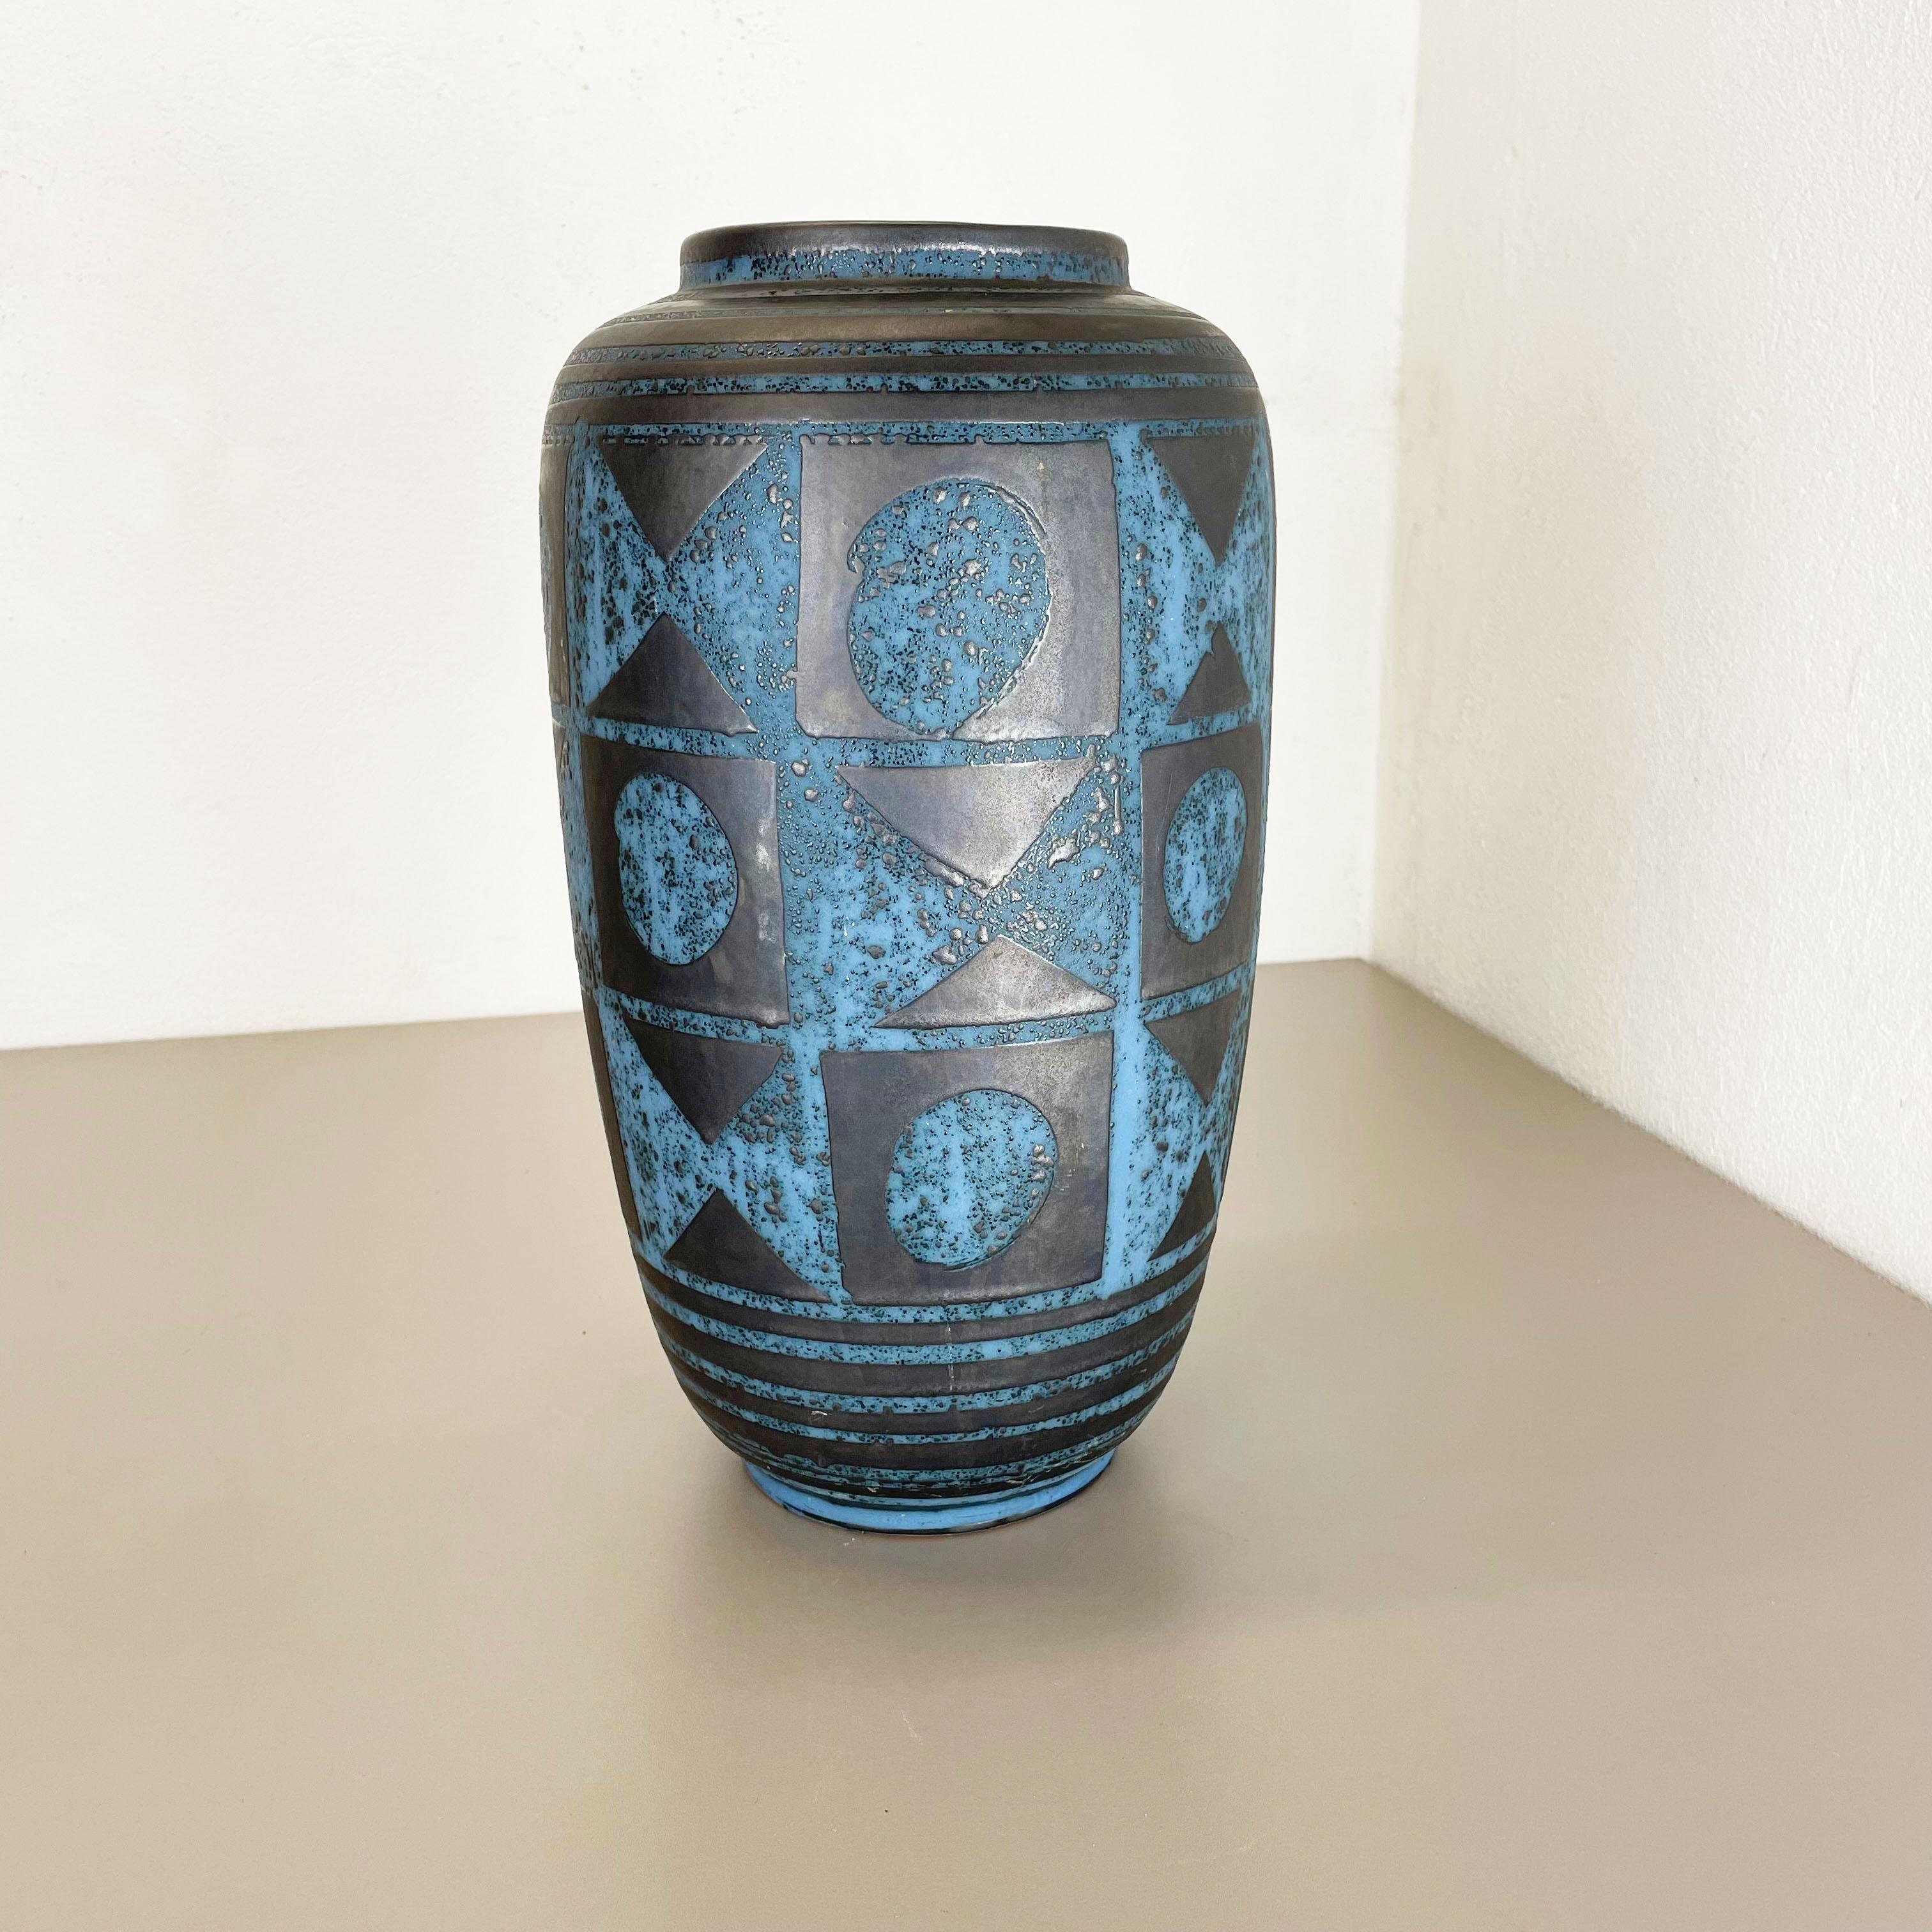 Article:

Ceramic pottery vase


Origin:

Germany


Designer:

Heinz Siery


Producer:

Carstens Tönnieshof, Germany


Decade:

1960s


This original vintage pottery object was designed by Heinz Siery and produced by